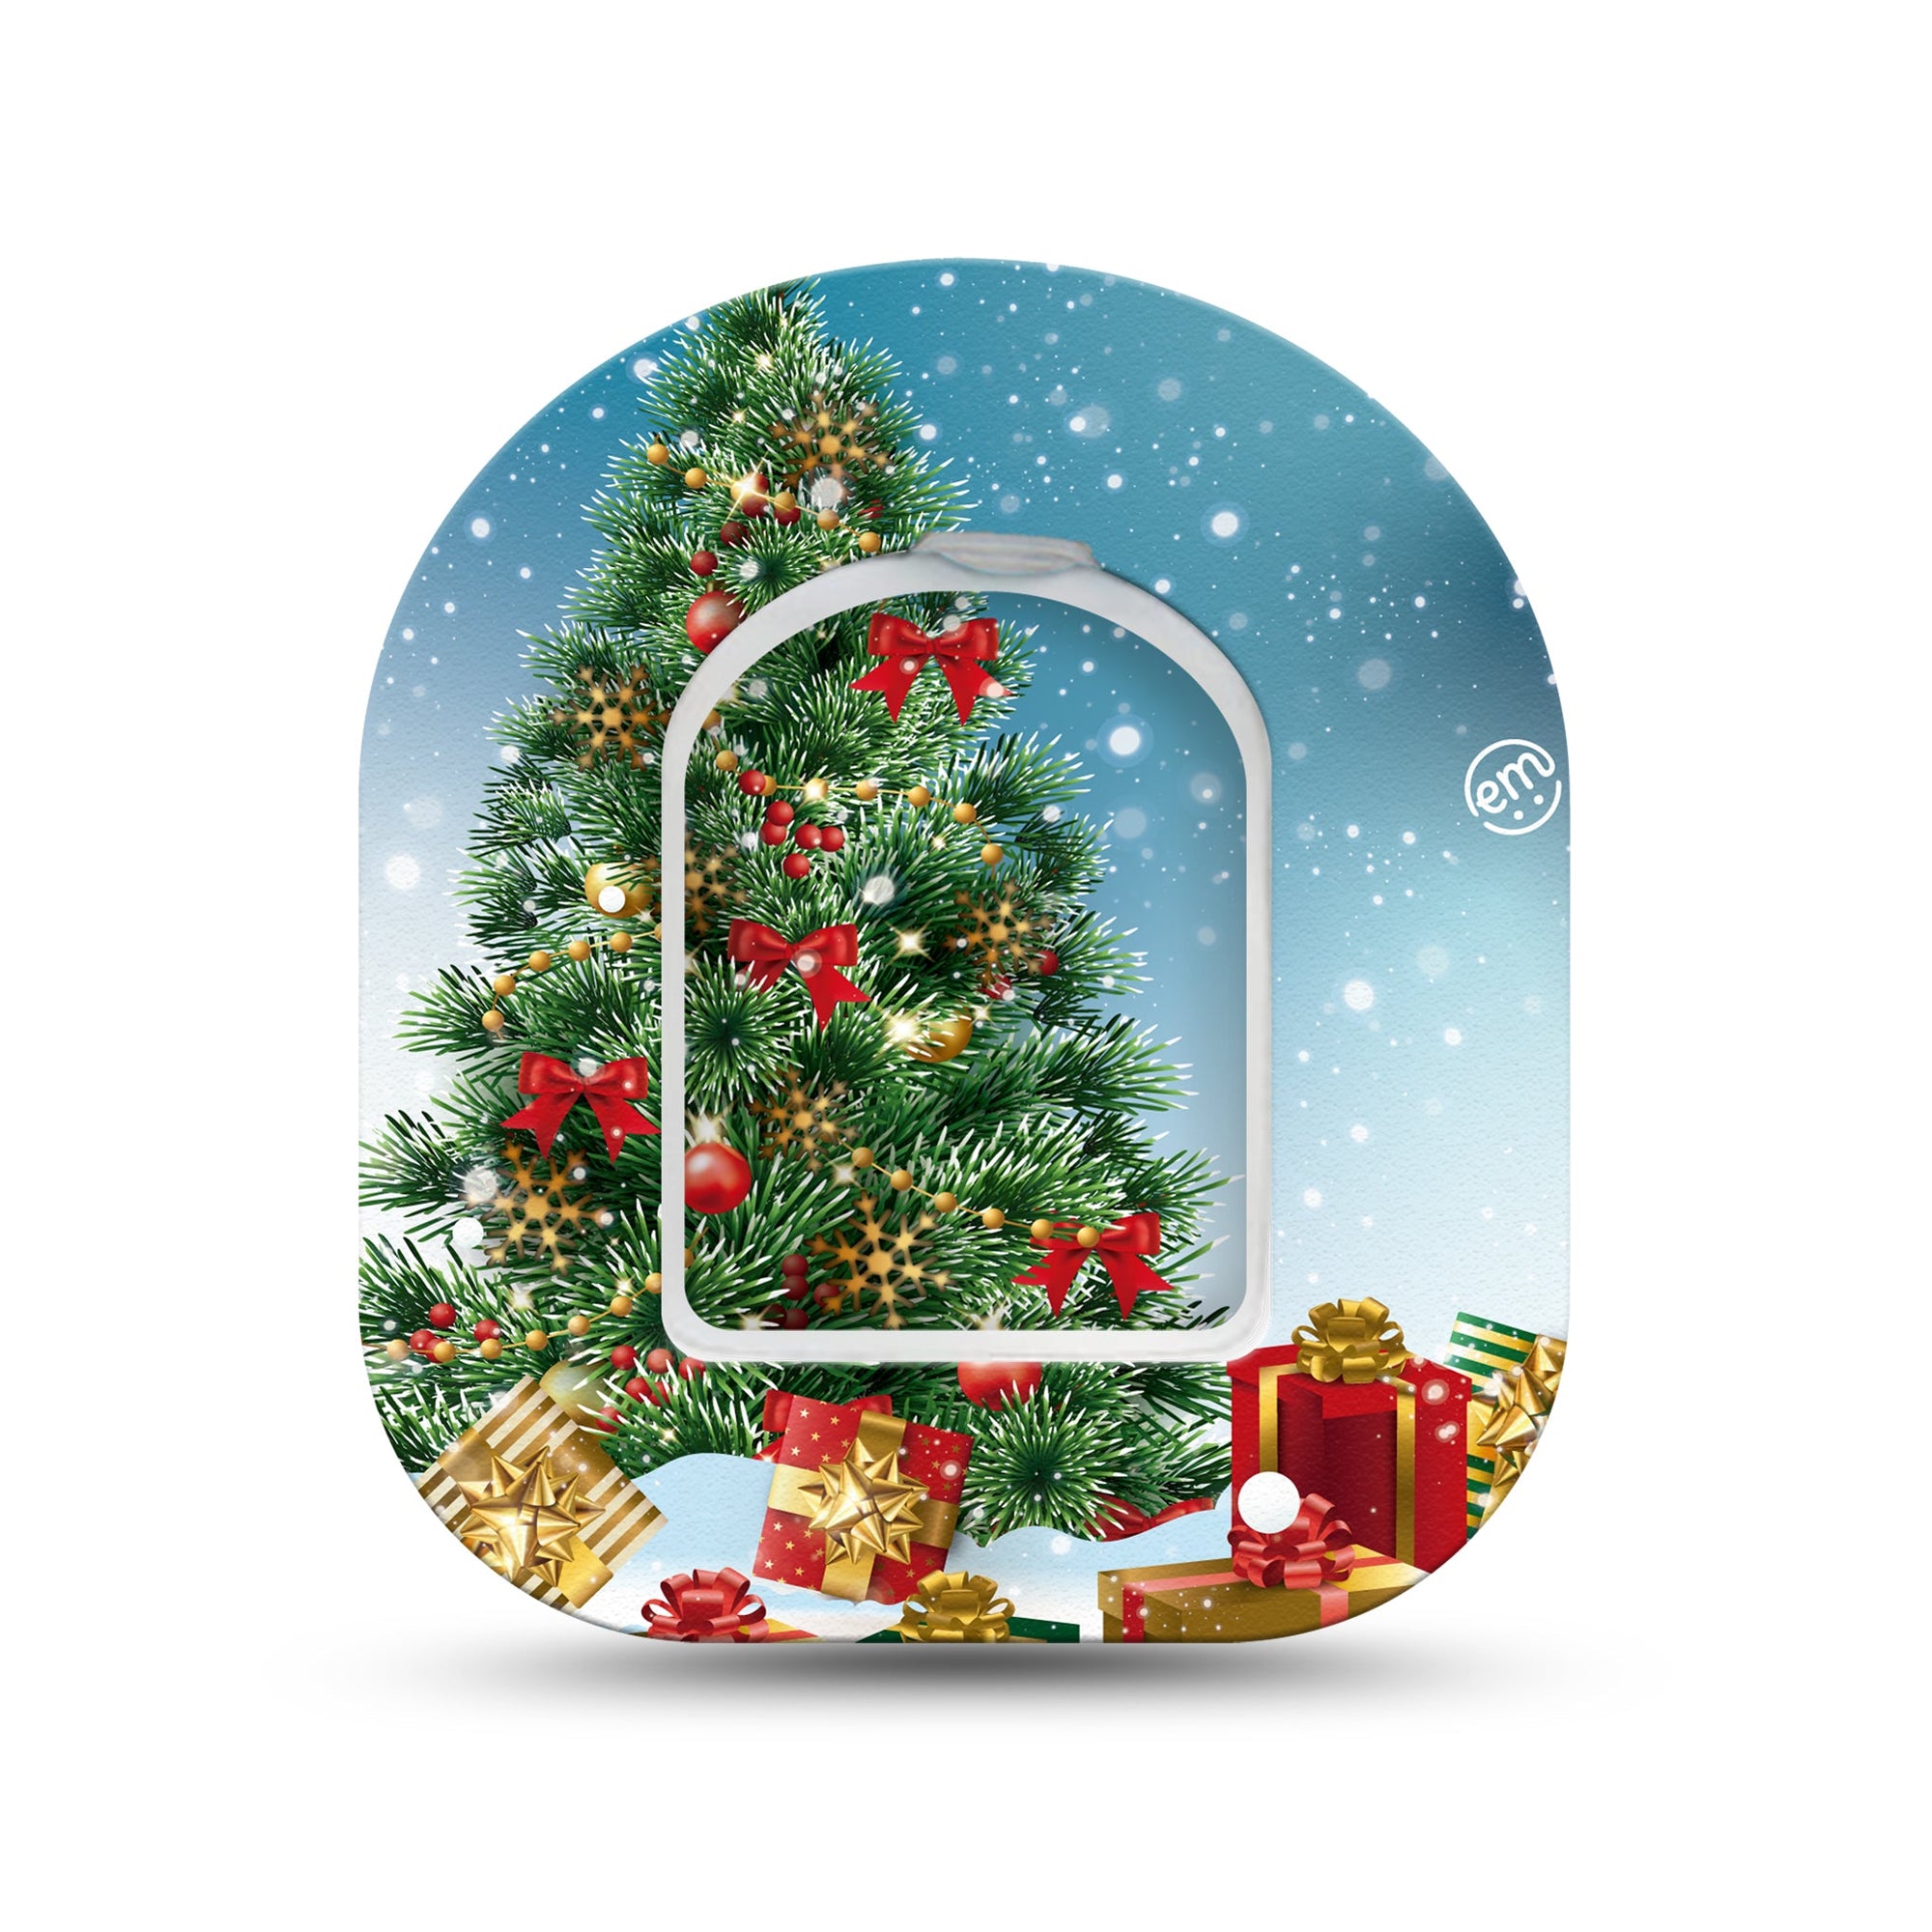 ExpressionMed Oh, Christmas Tree Pod Mini Tape Single Sticker and Single Tape, Holiday Tradition Fixing Ring Tape Pump Design